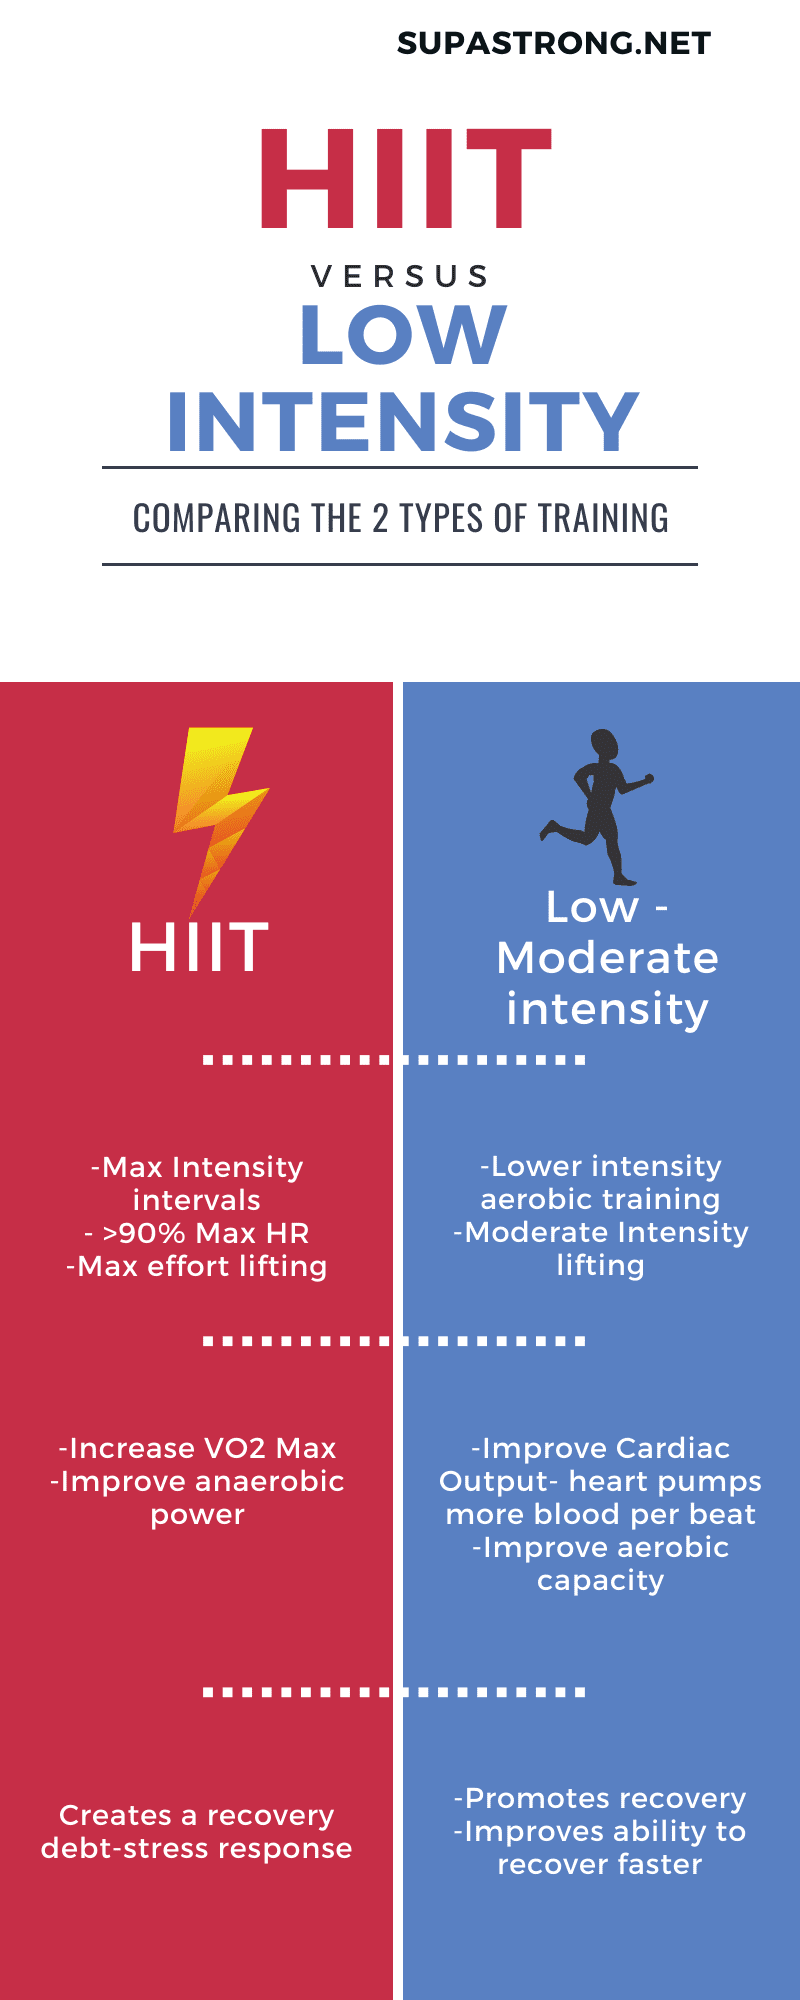 can HIIT be dangerous?  Yes, too much HIIT can be dangerous